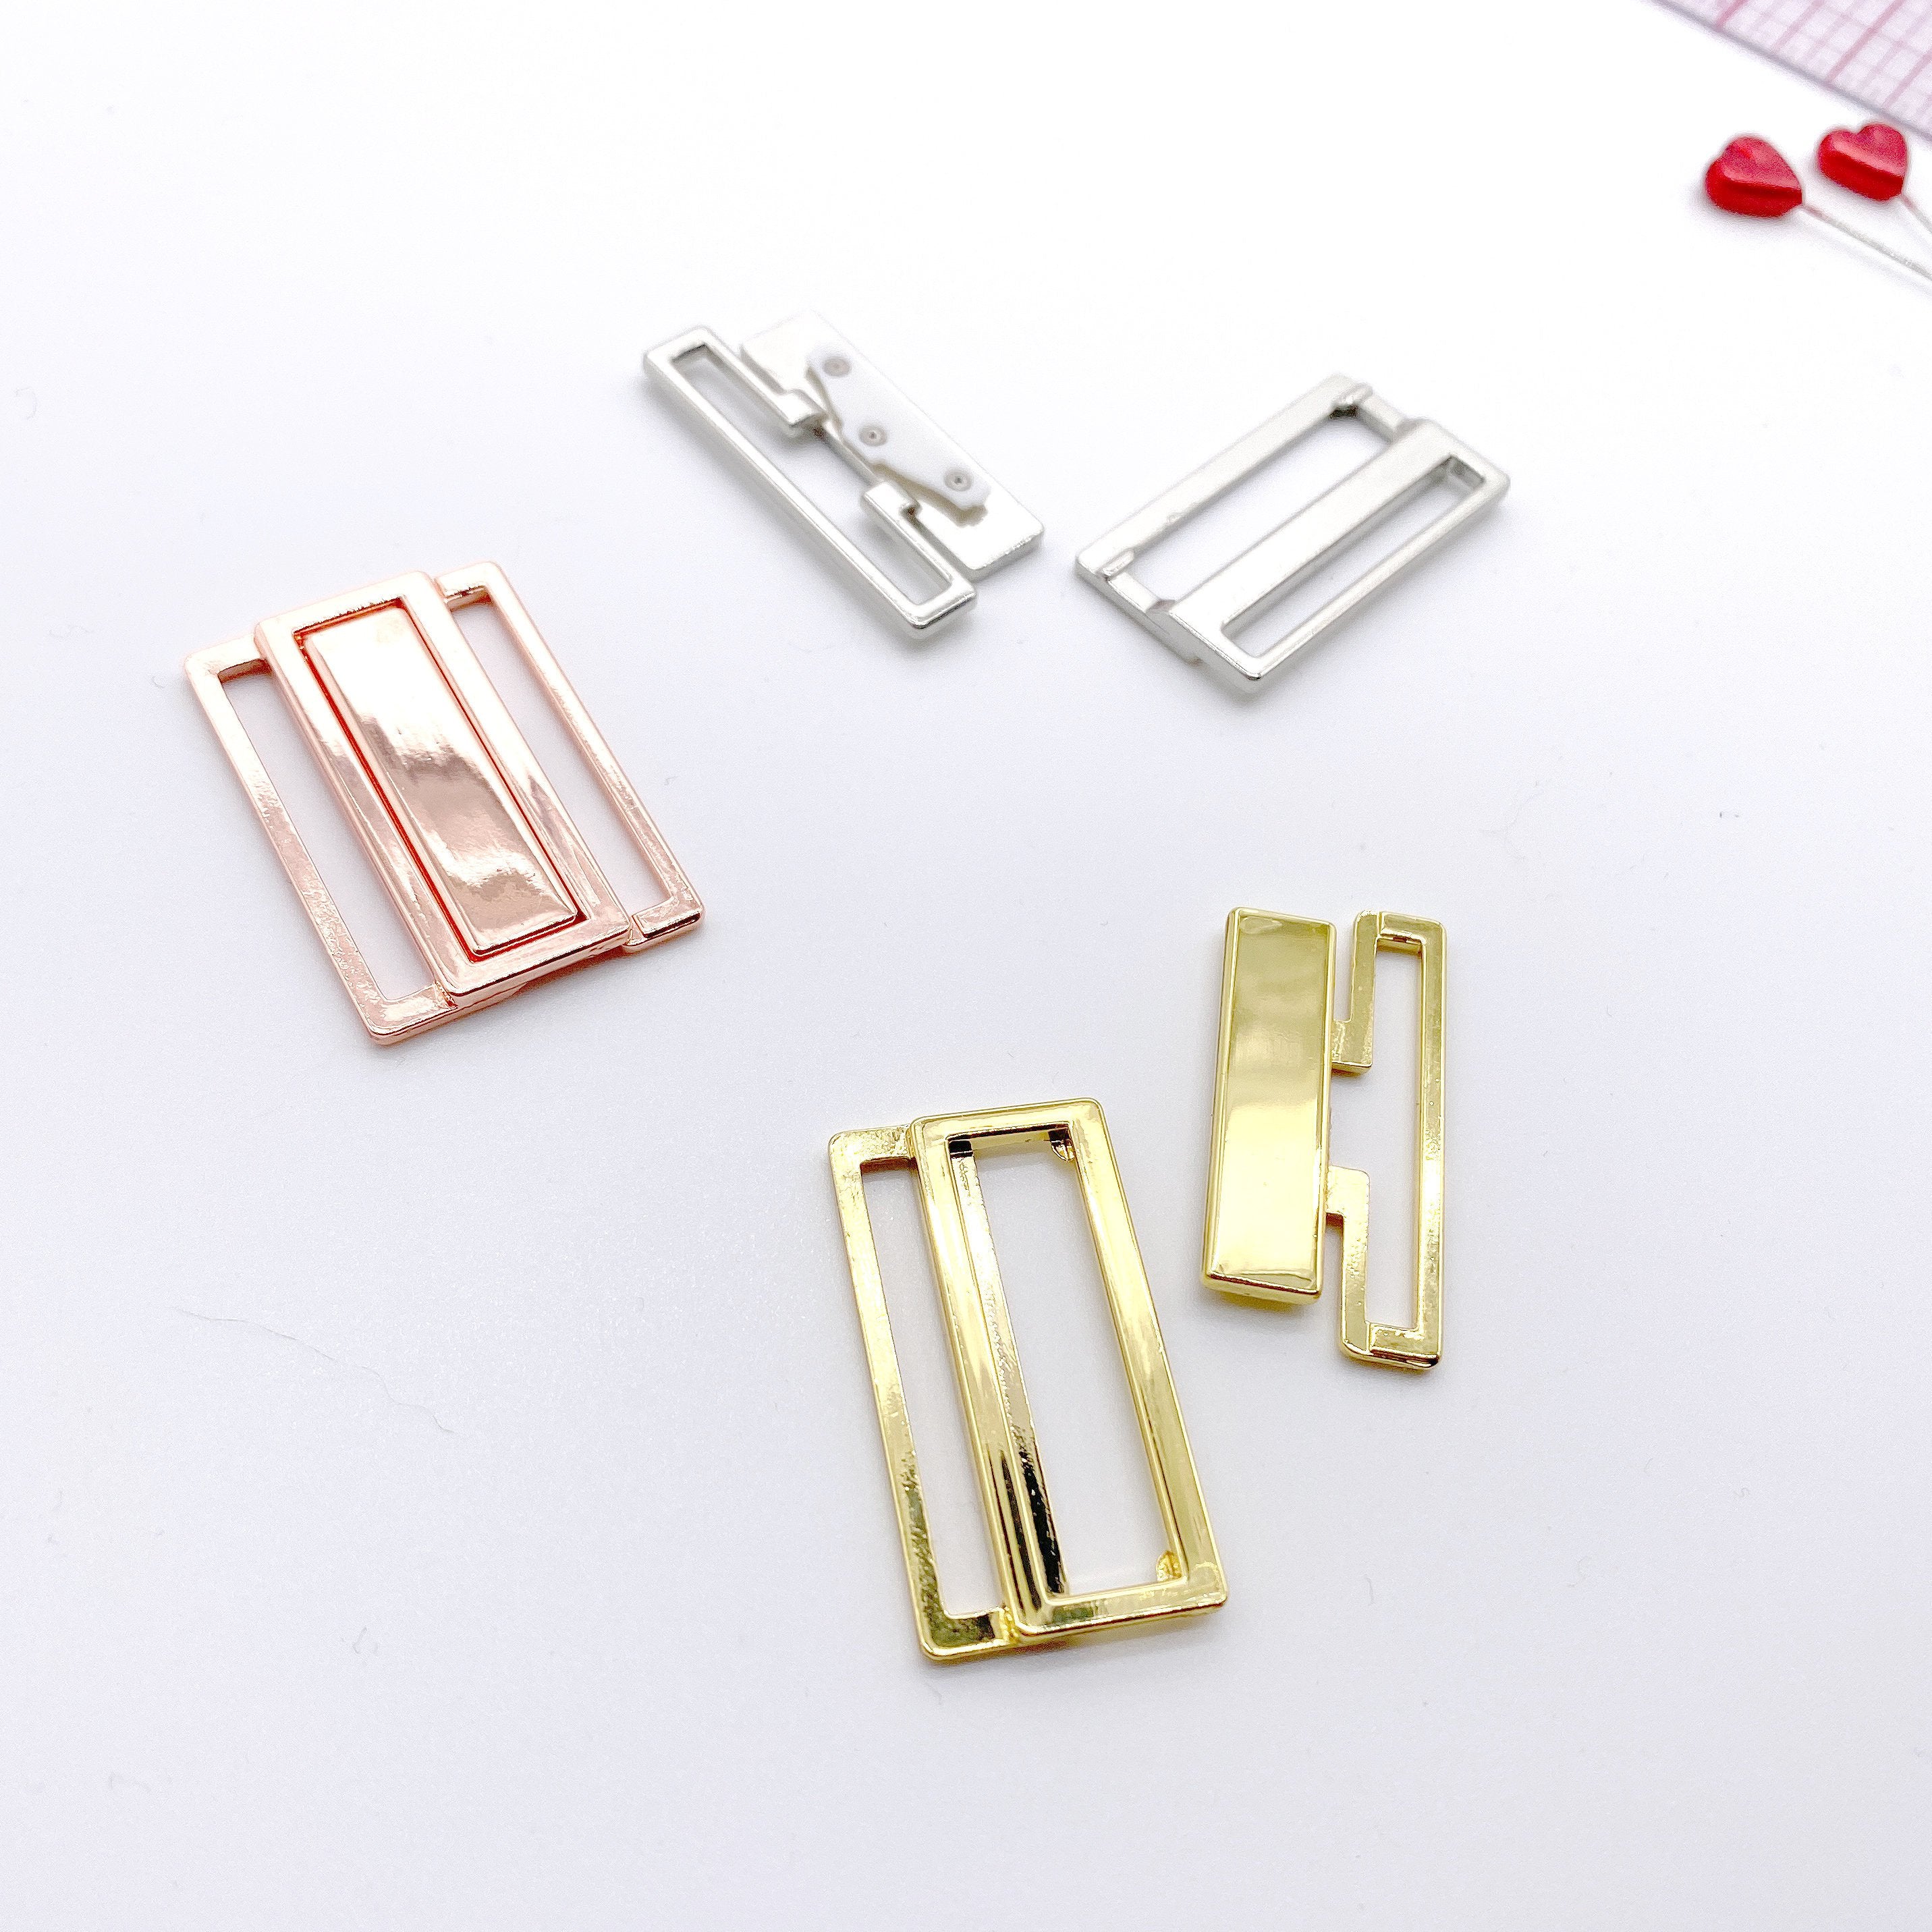 1 1/8" (30mm) Slim Metal Front Closures - Silver, Rose Gold or Gold for Bra, Swimwear and Lingerie-Stitch Love Studio